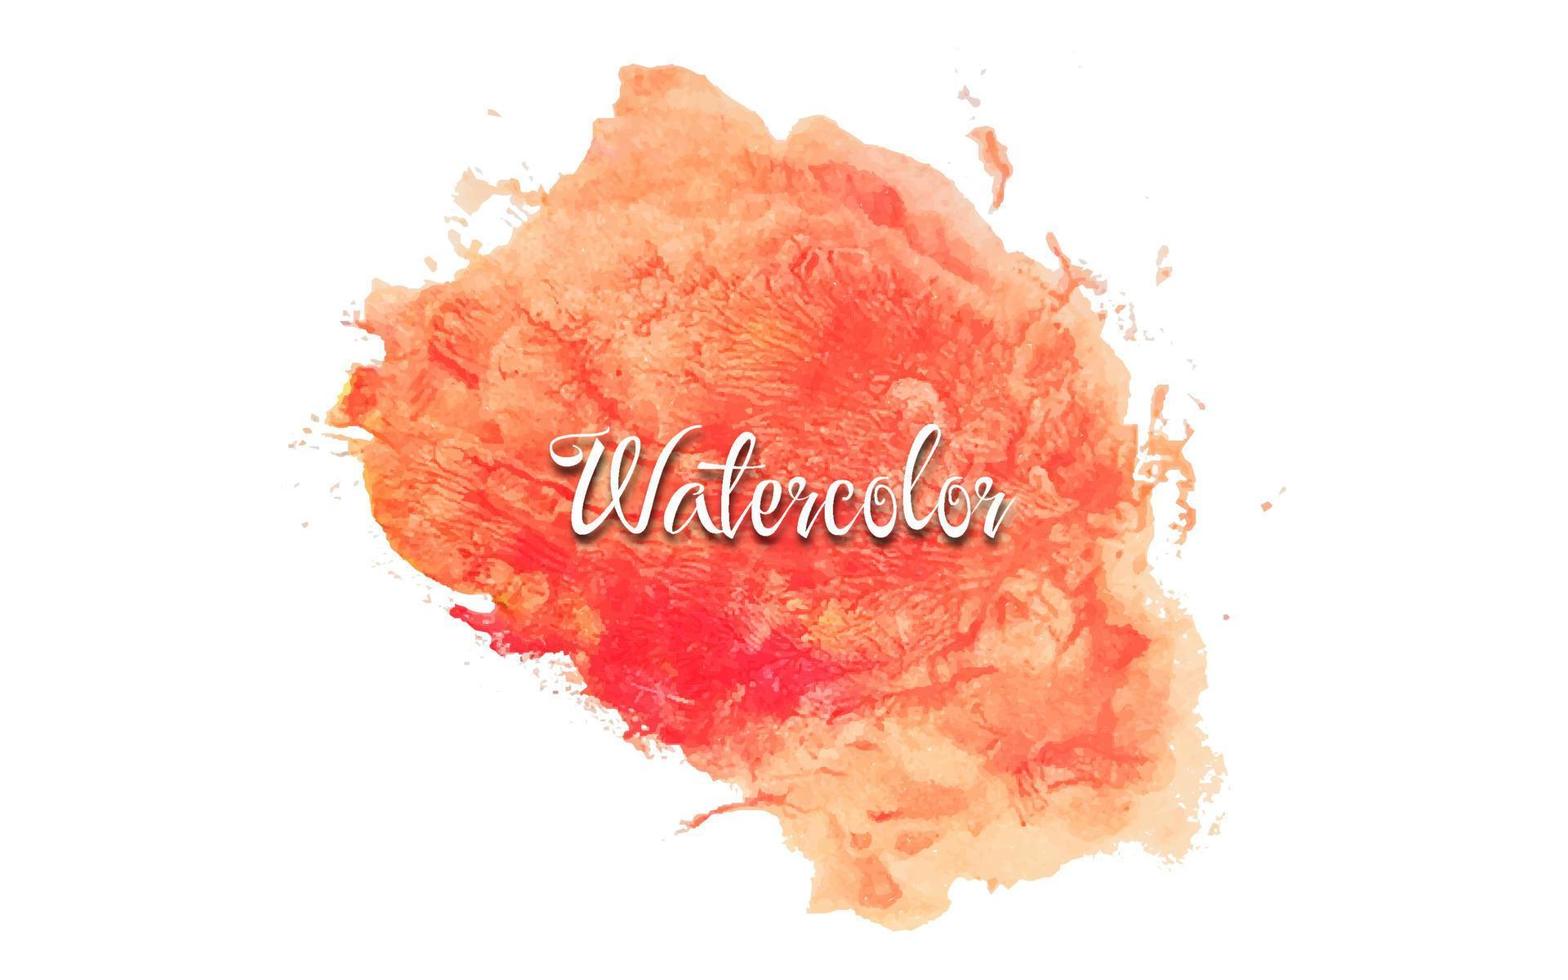 Orange watercolor stroke background with paint splash texture effect style. Graphic design template element with brush concept for banner, flyer, card, brochure cover, social media post, etc vector